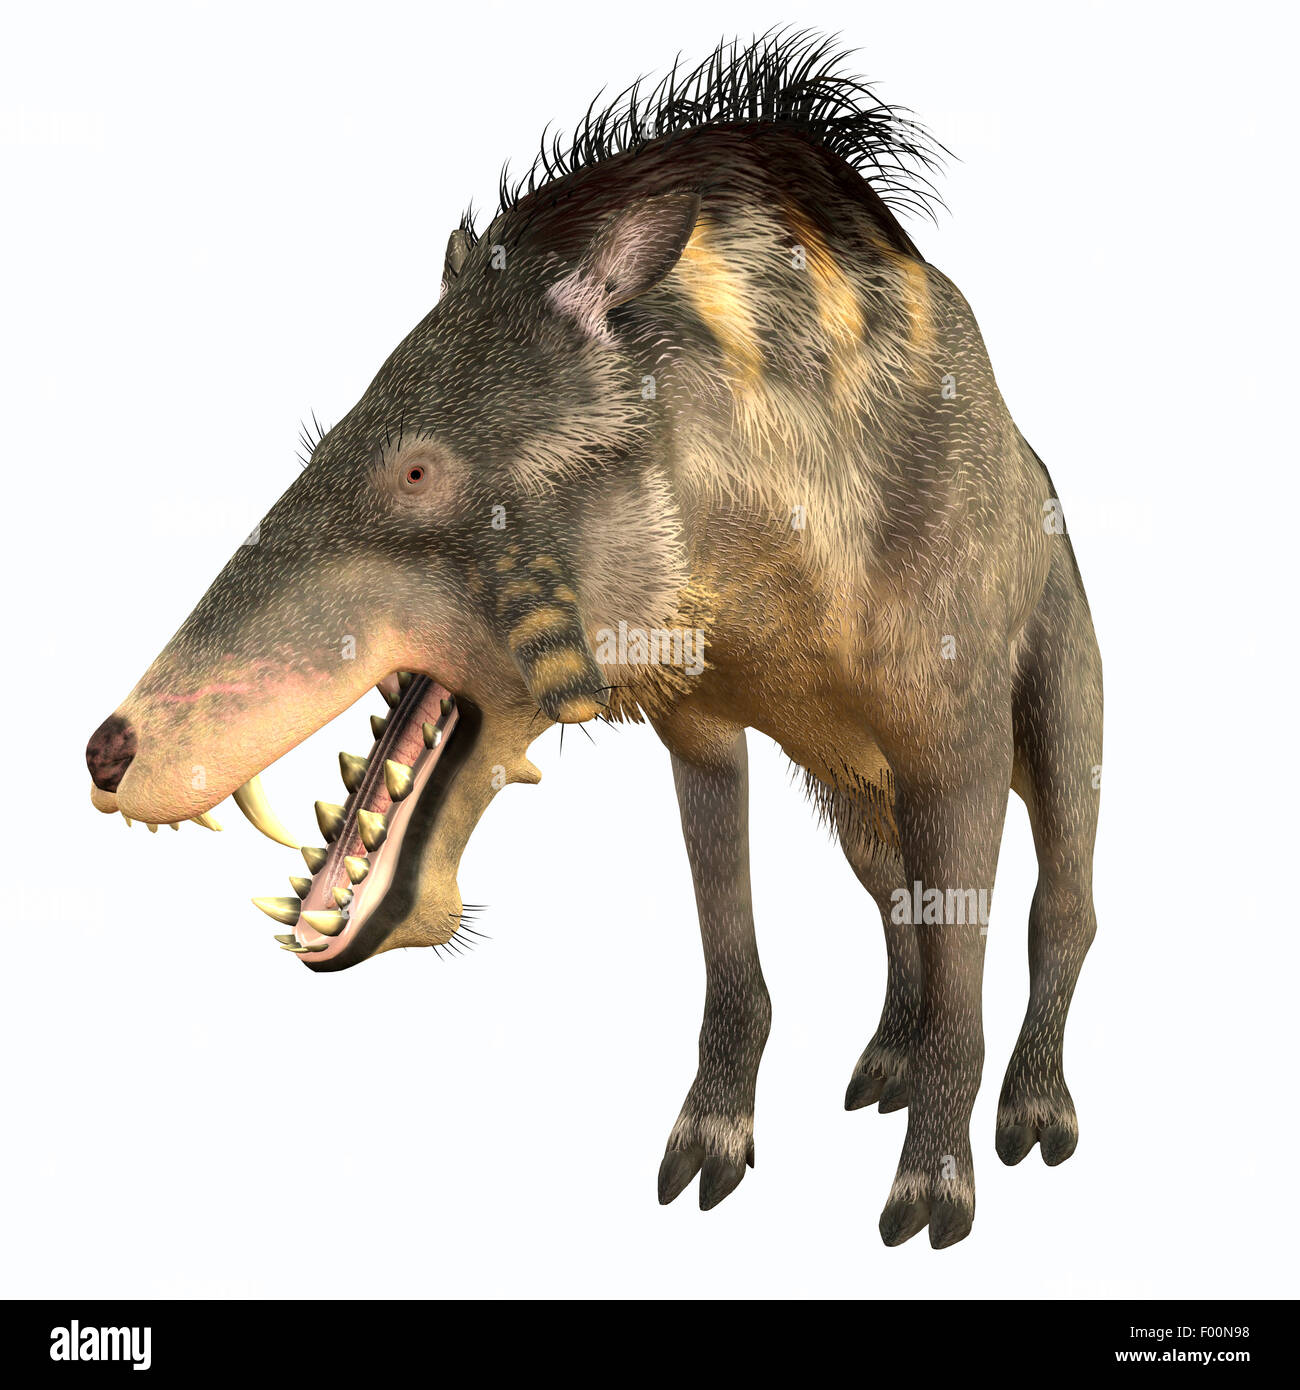 Entelodon was an omnivorous pig that lived in Europe and Asia in the Eocene through the Oligocene Periods. Stock Photo